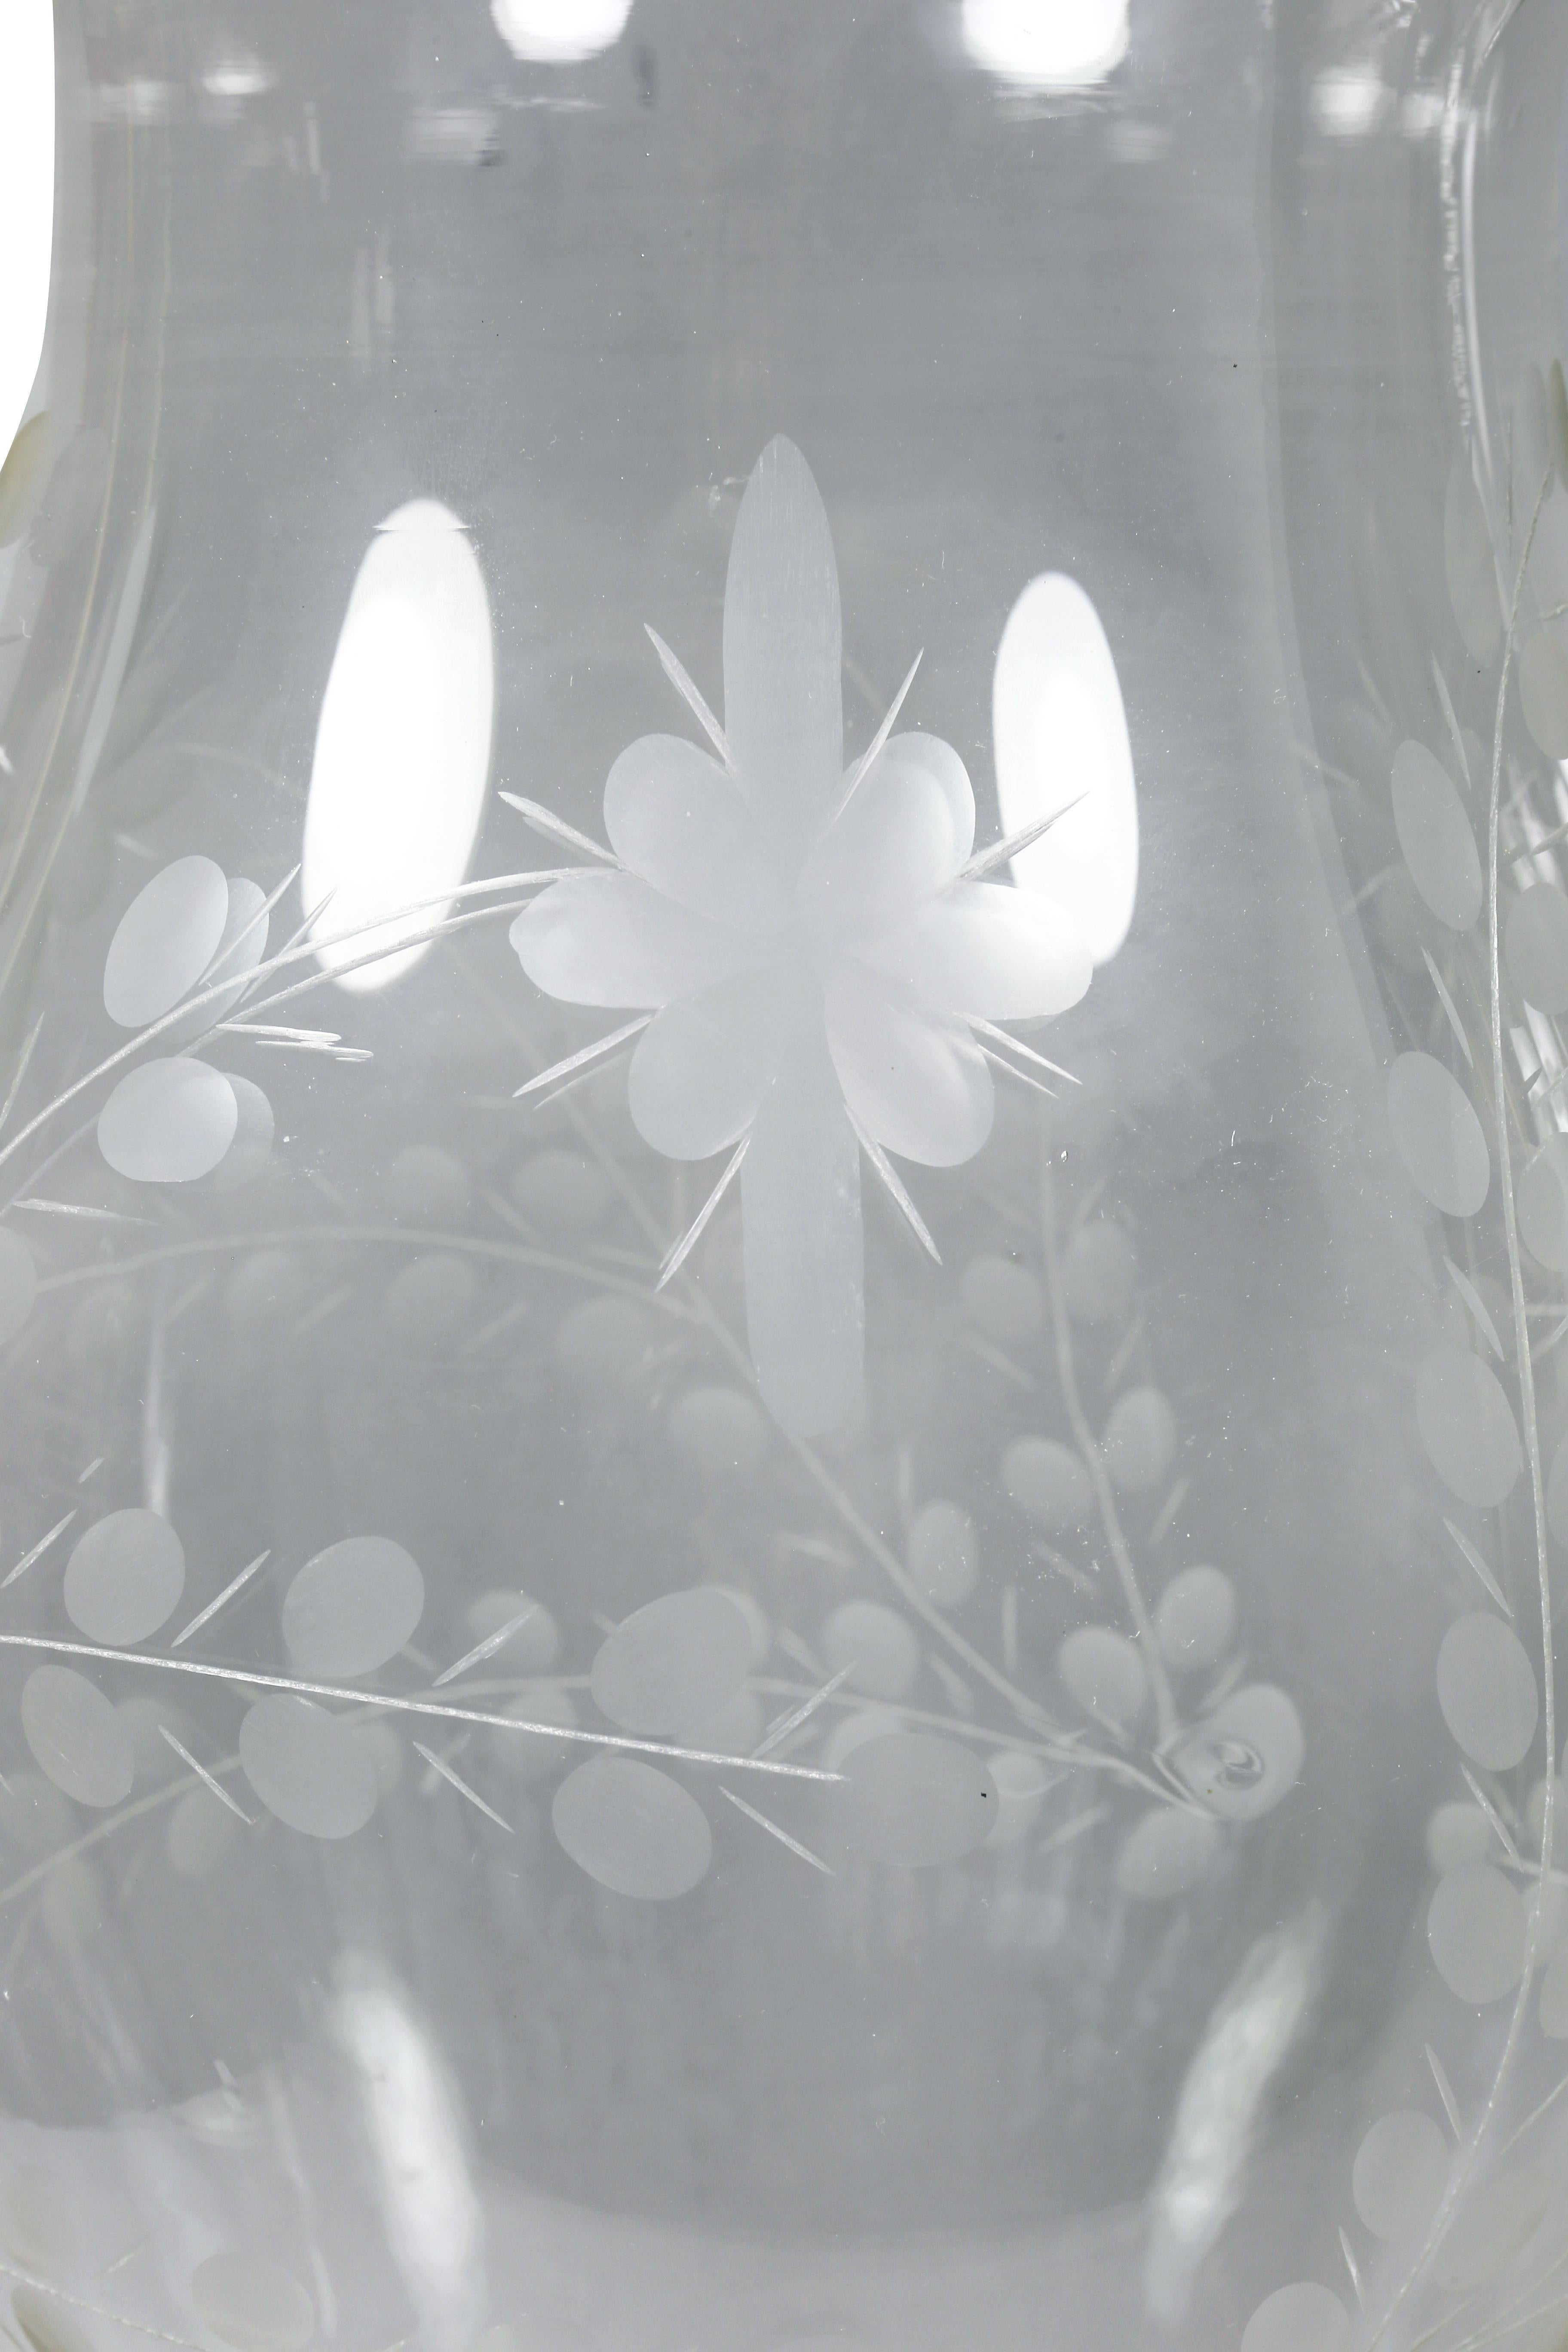 Each typical form. Floral engraved decoration.